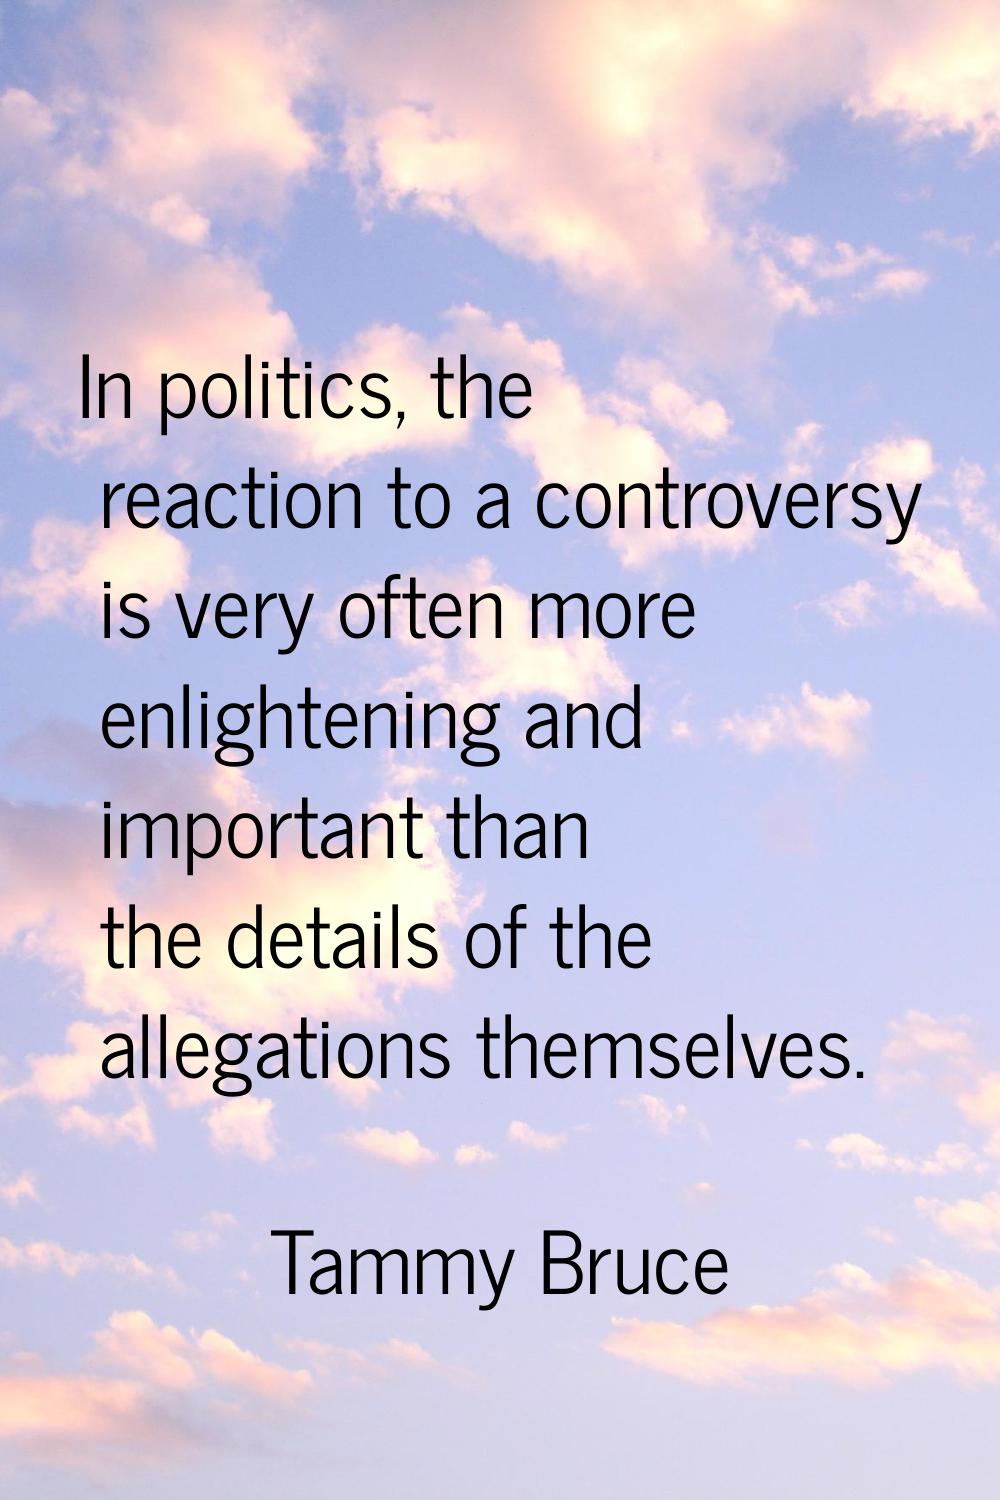 In politics, the reaction to a controversy is very often more enlightening and important than the d